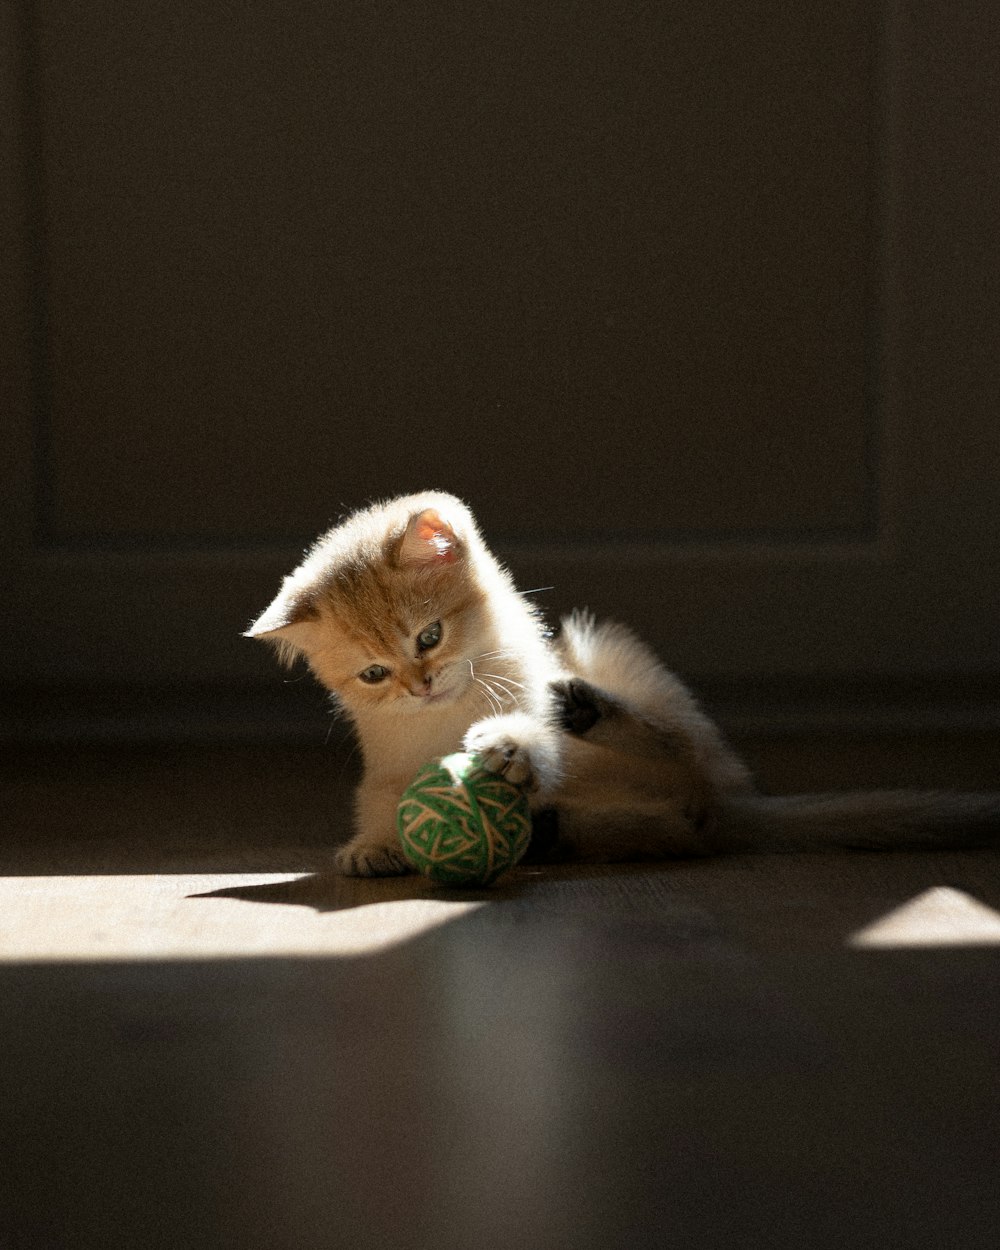 a kitten playing with a toy on the floor